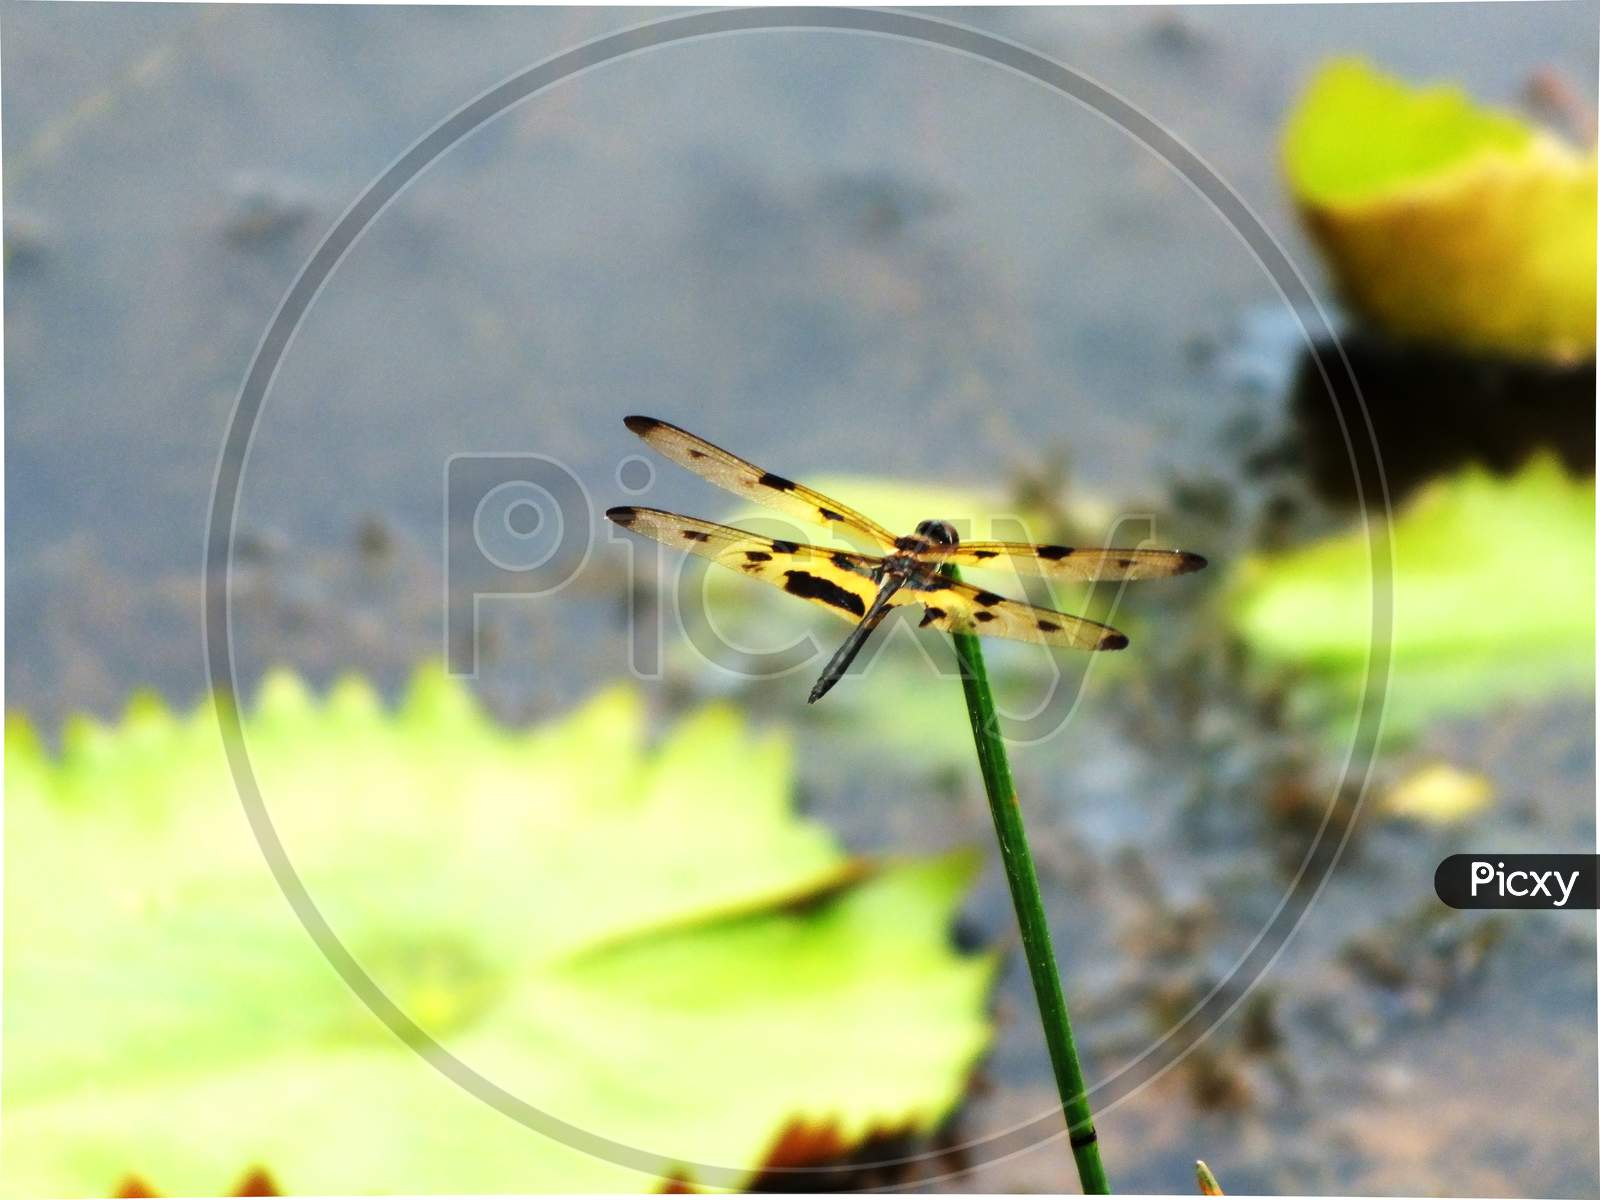 Yellow & black sptted dragonflies resting in the pond